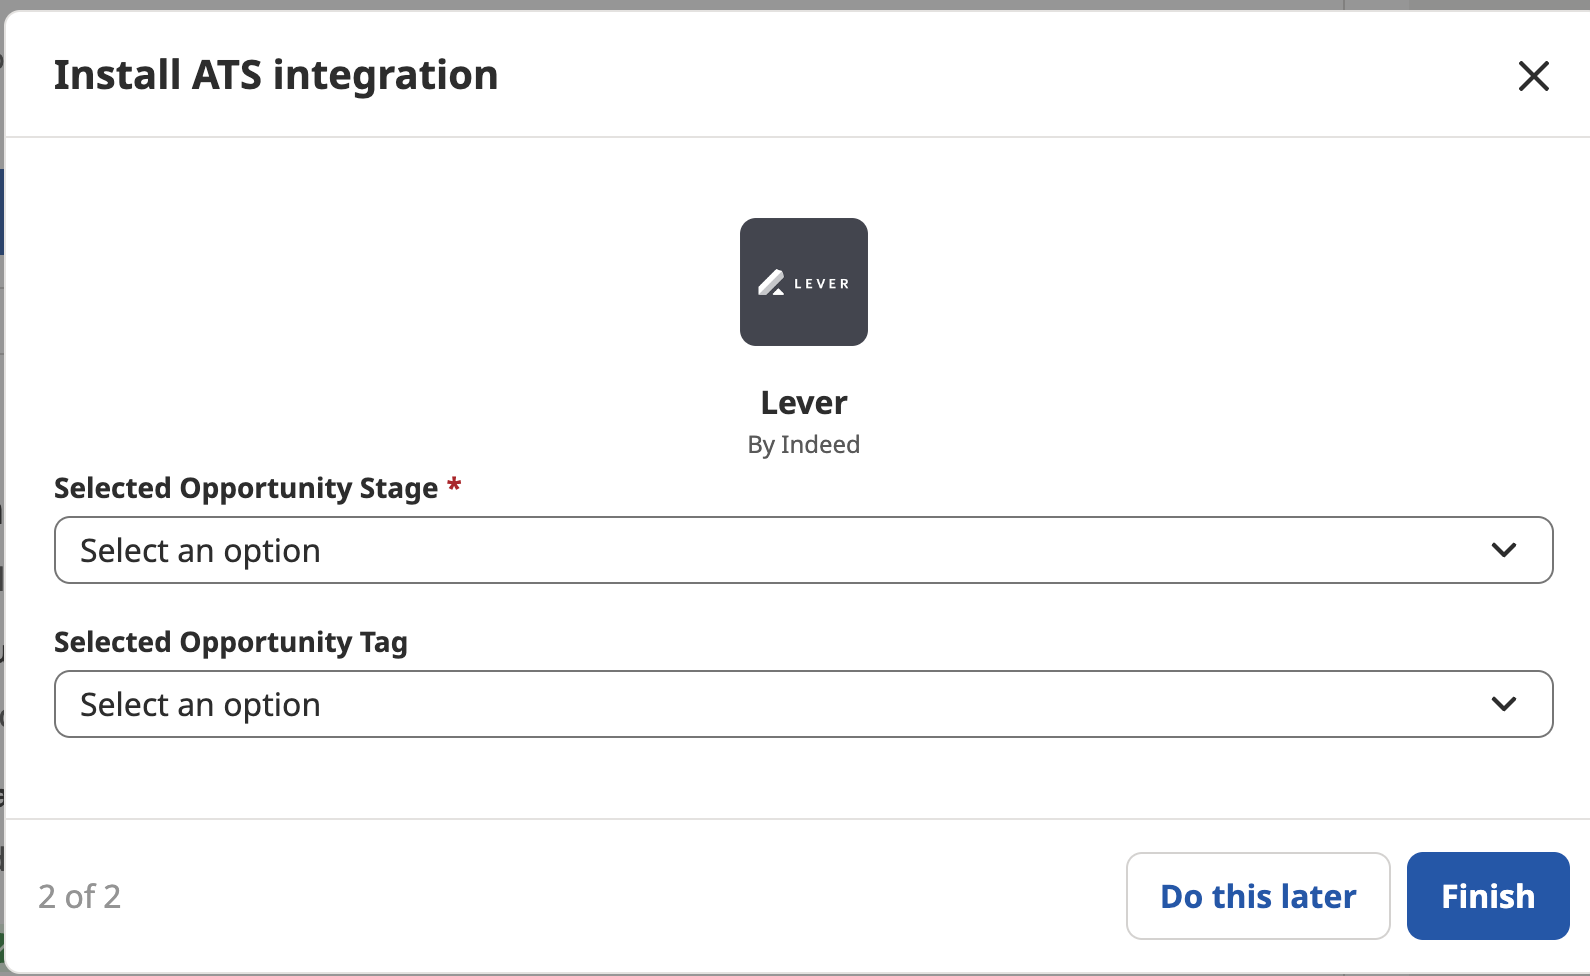 Install Integration modal with dropdown fields for opportunity stage and opportunity tag